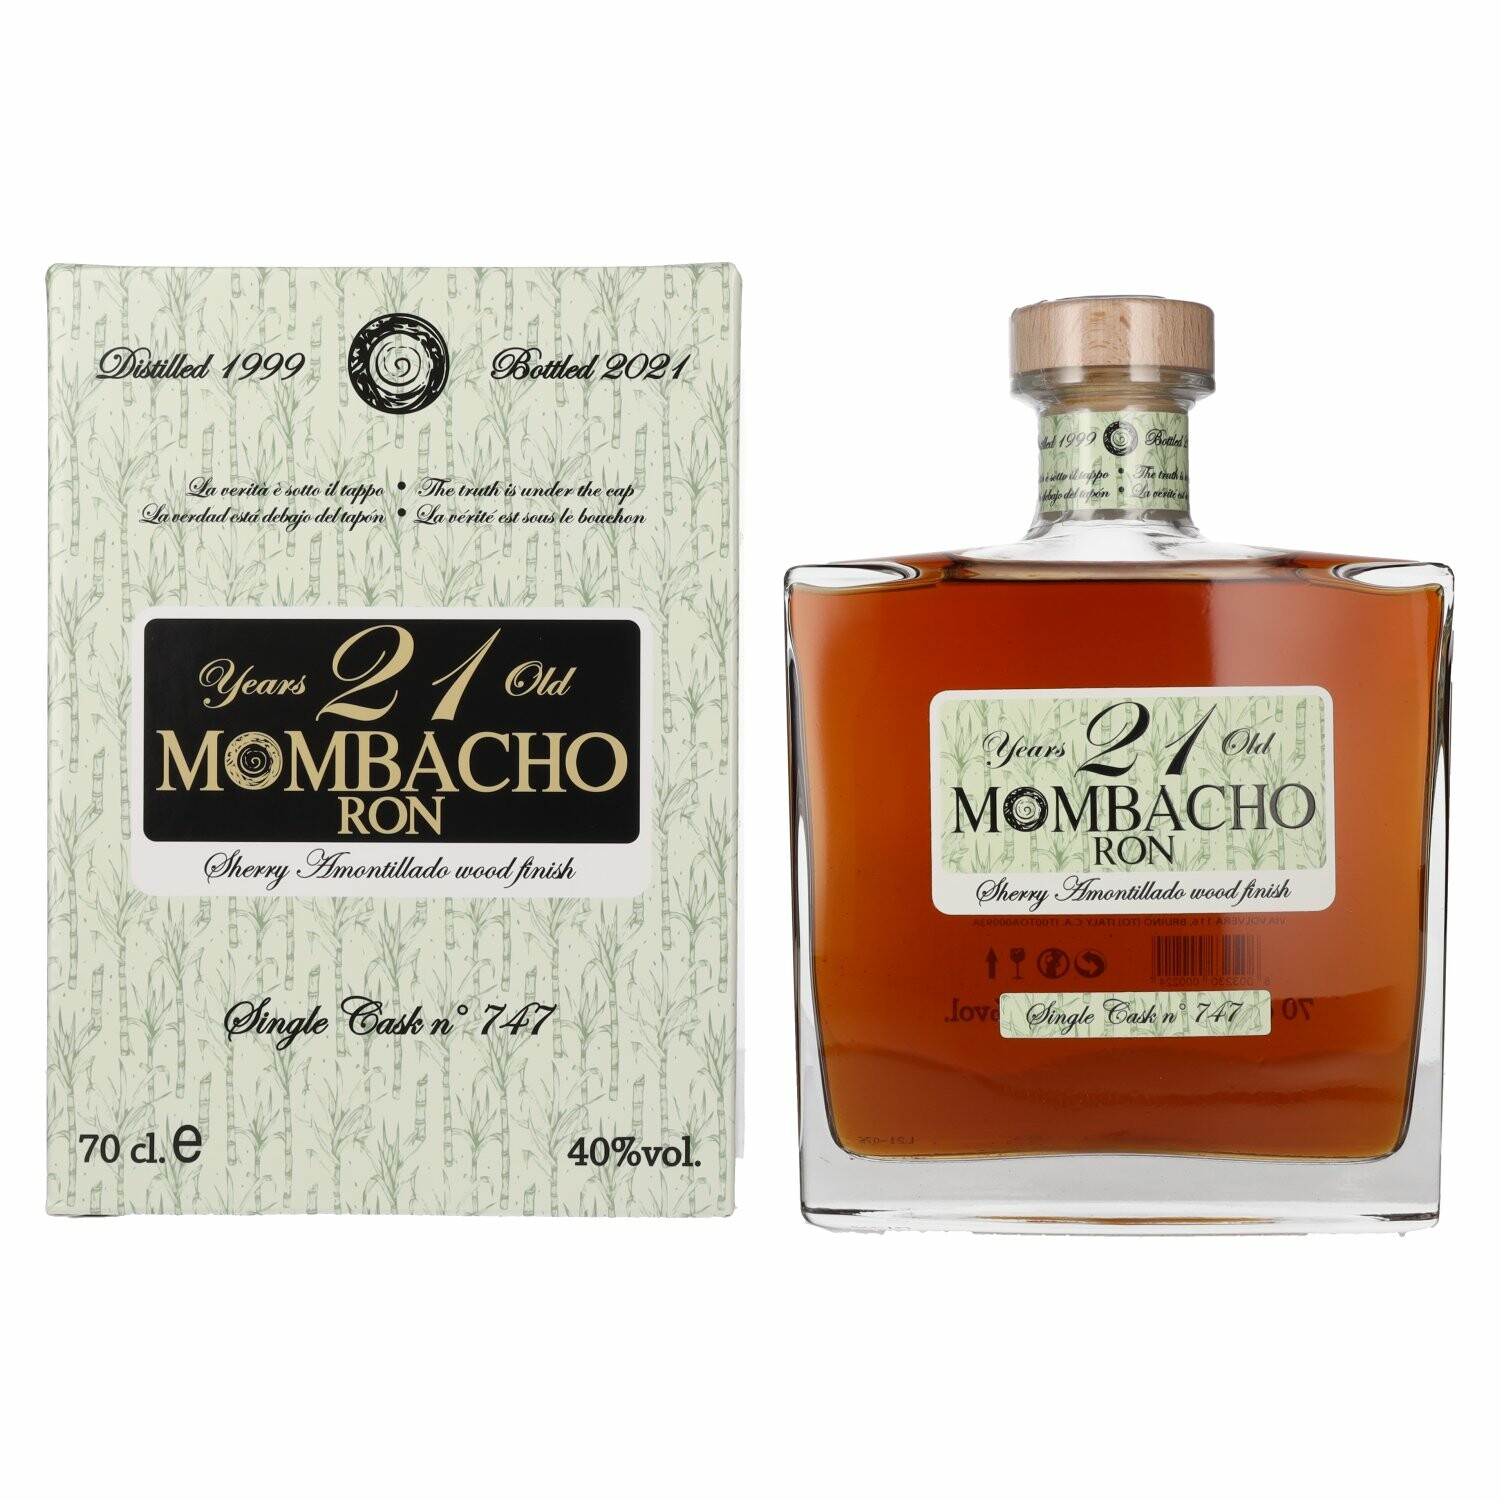 Mombacho Ron 21 Years Old Sherry Amontillado Wood Finish 40% Vol. 0,7l in Giftbox